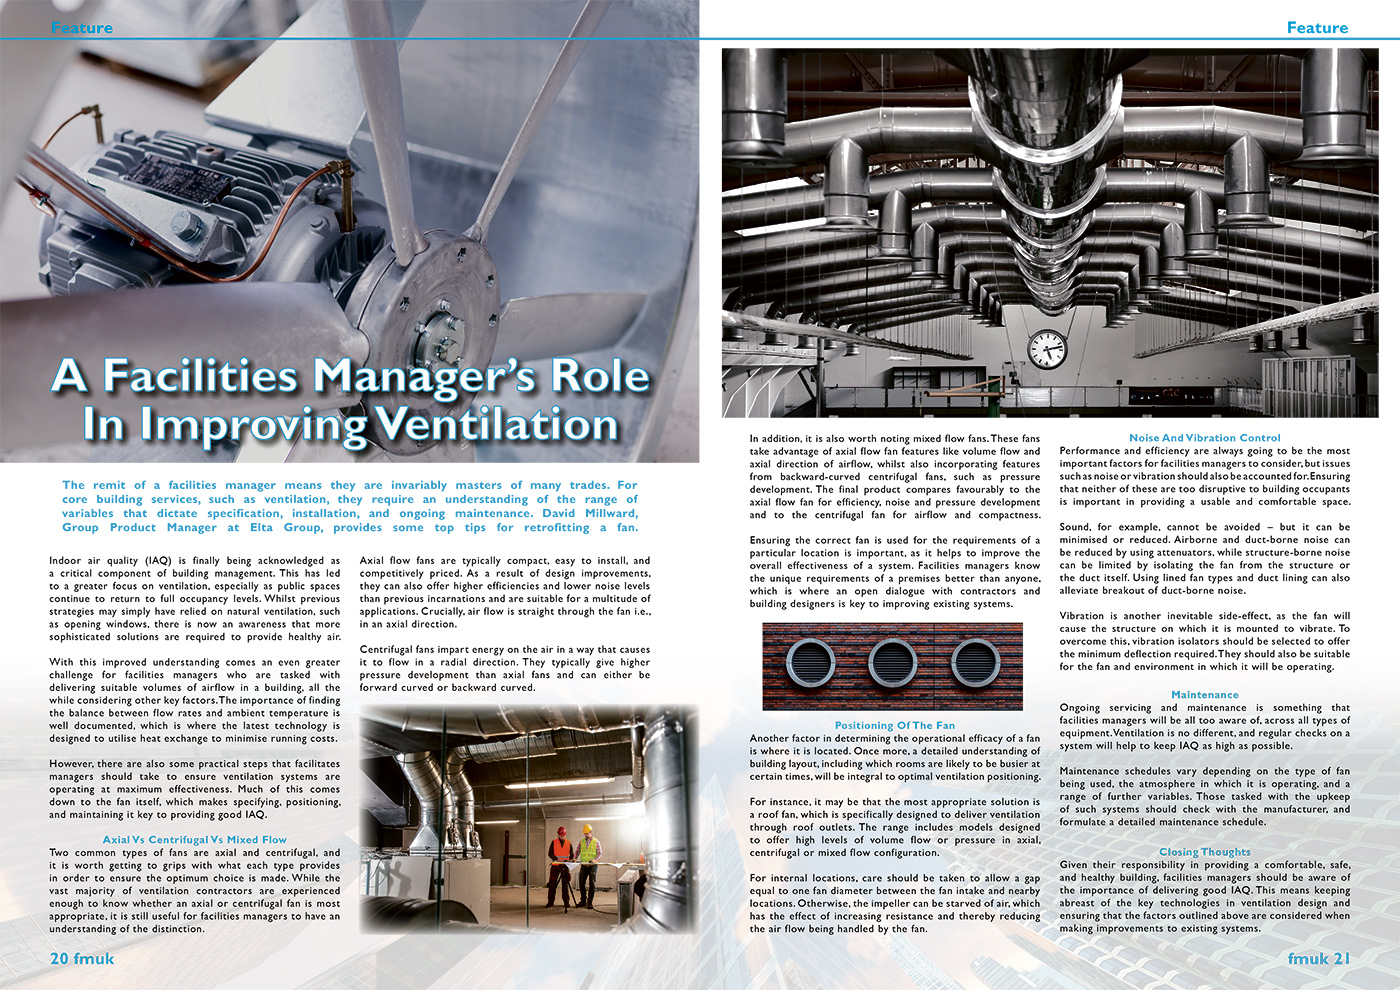 A Facilities Manager’s Role In Improving Ventilation